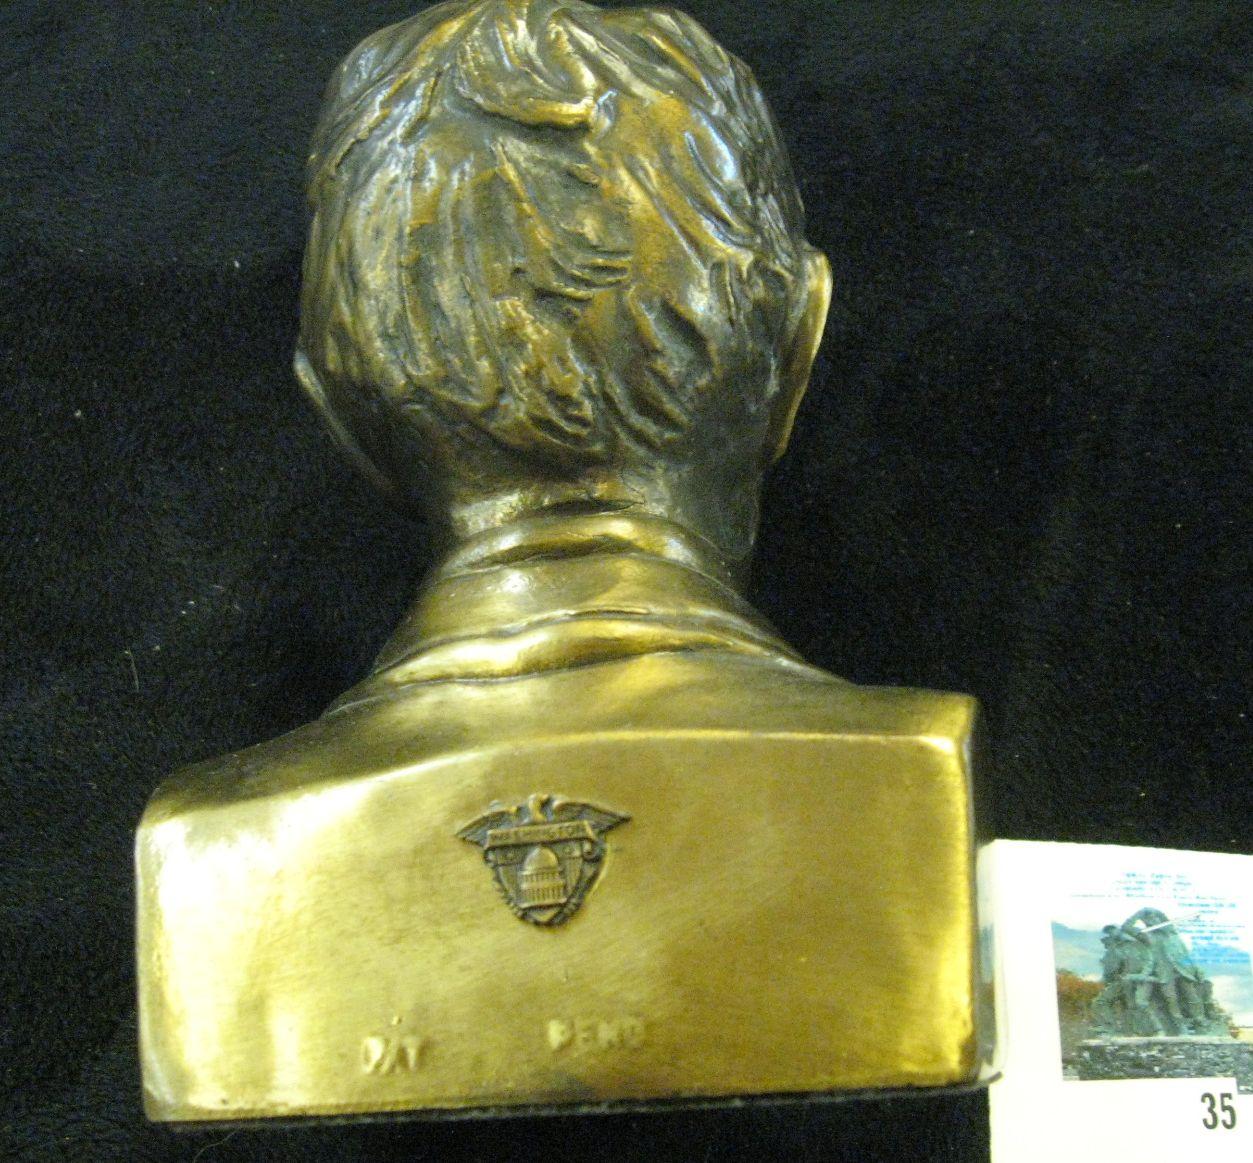 6 inch Bronze bust of Abraham Lincoln, hollow but still heavy